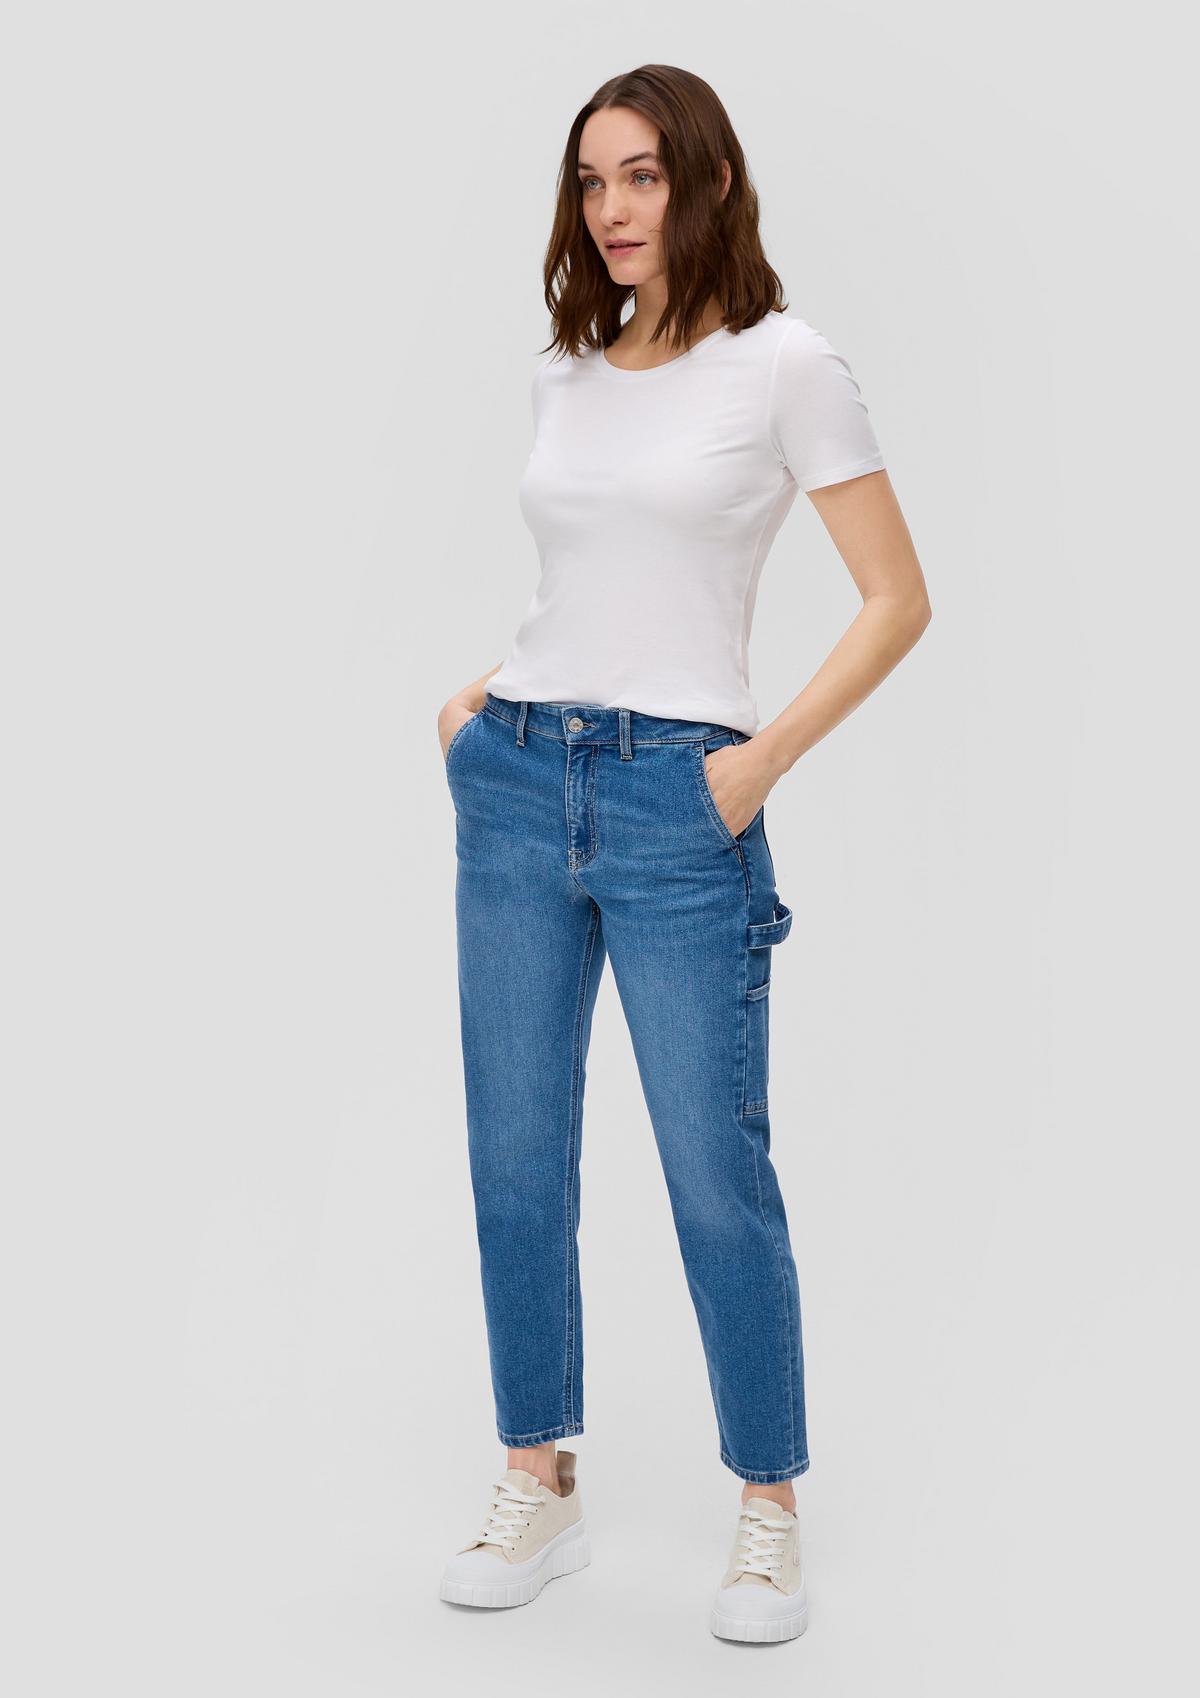 s.Oliver Ankle Jeans Francis / Relaxed Fit / Mid Rise / Tapered Leg / Boyfriend